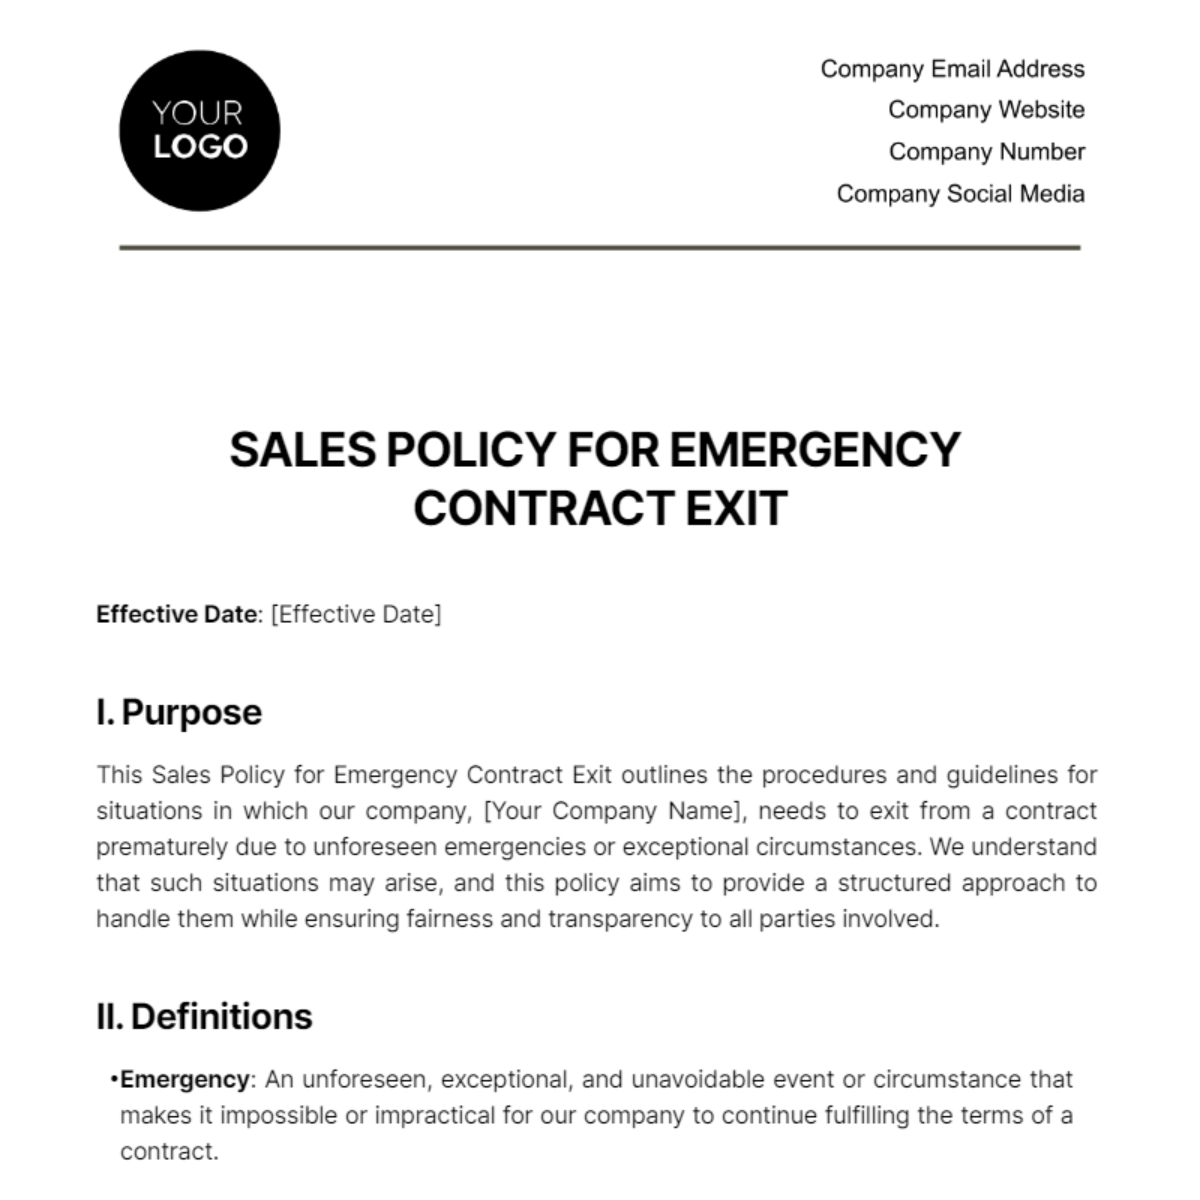 Free Sales Policy for Emergency Contract Exit Template